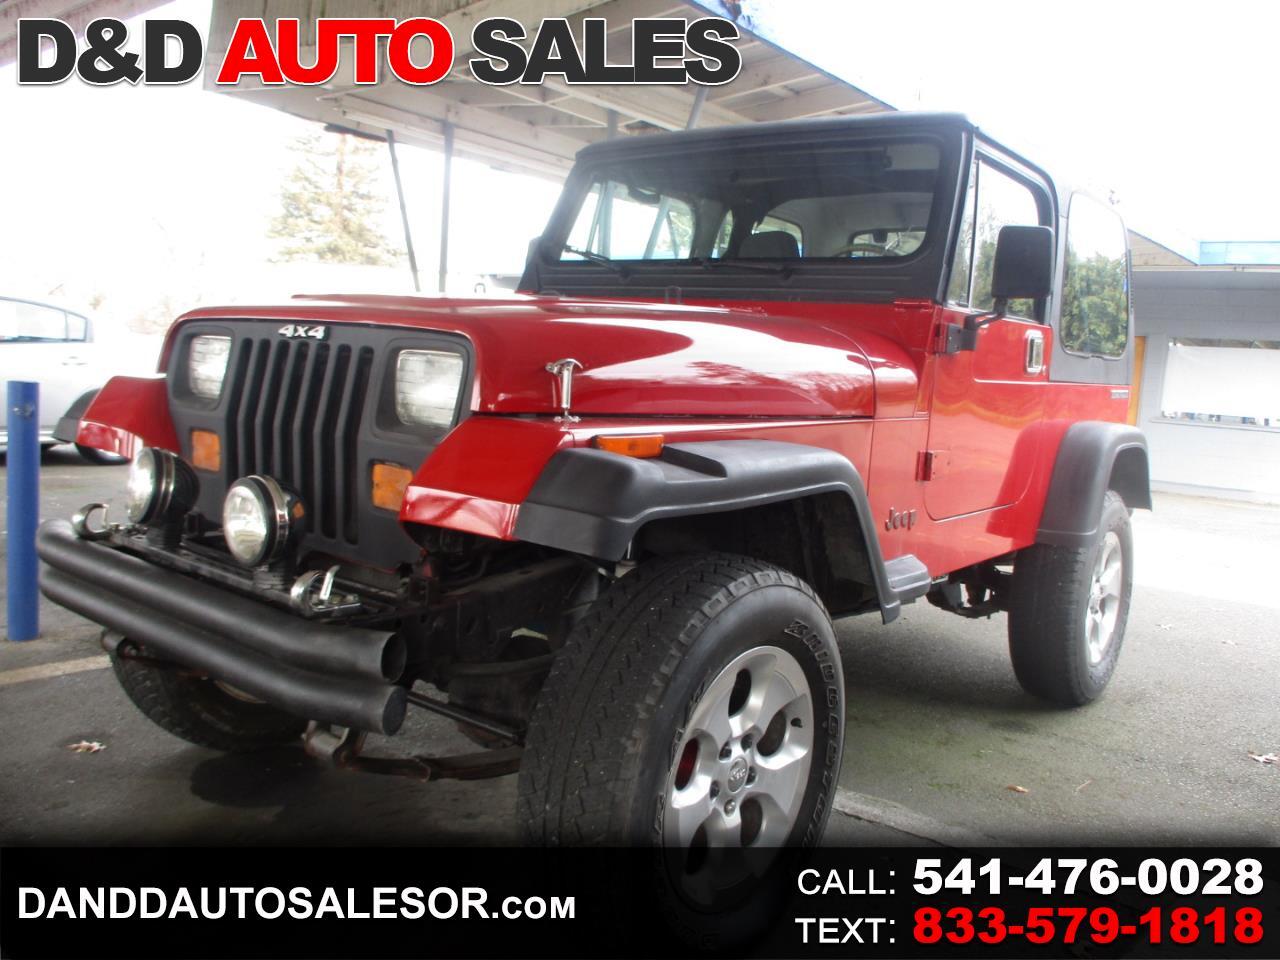 Used 1990 Jeep Wrangler Hard Top for Sale in Grants Pass OR 97526 D & D  Auto Sales